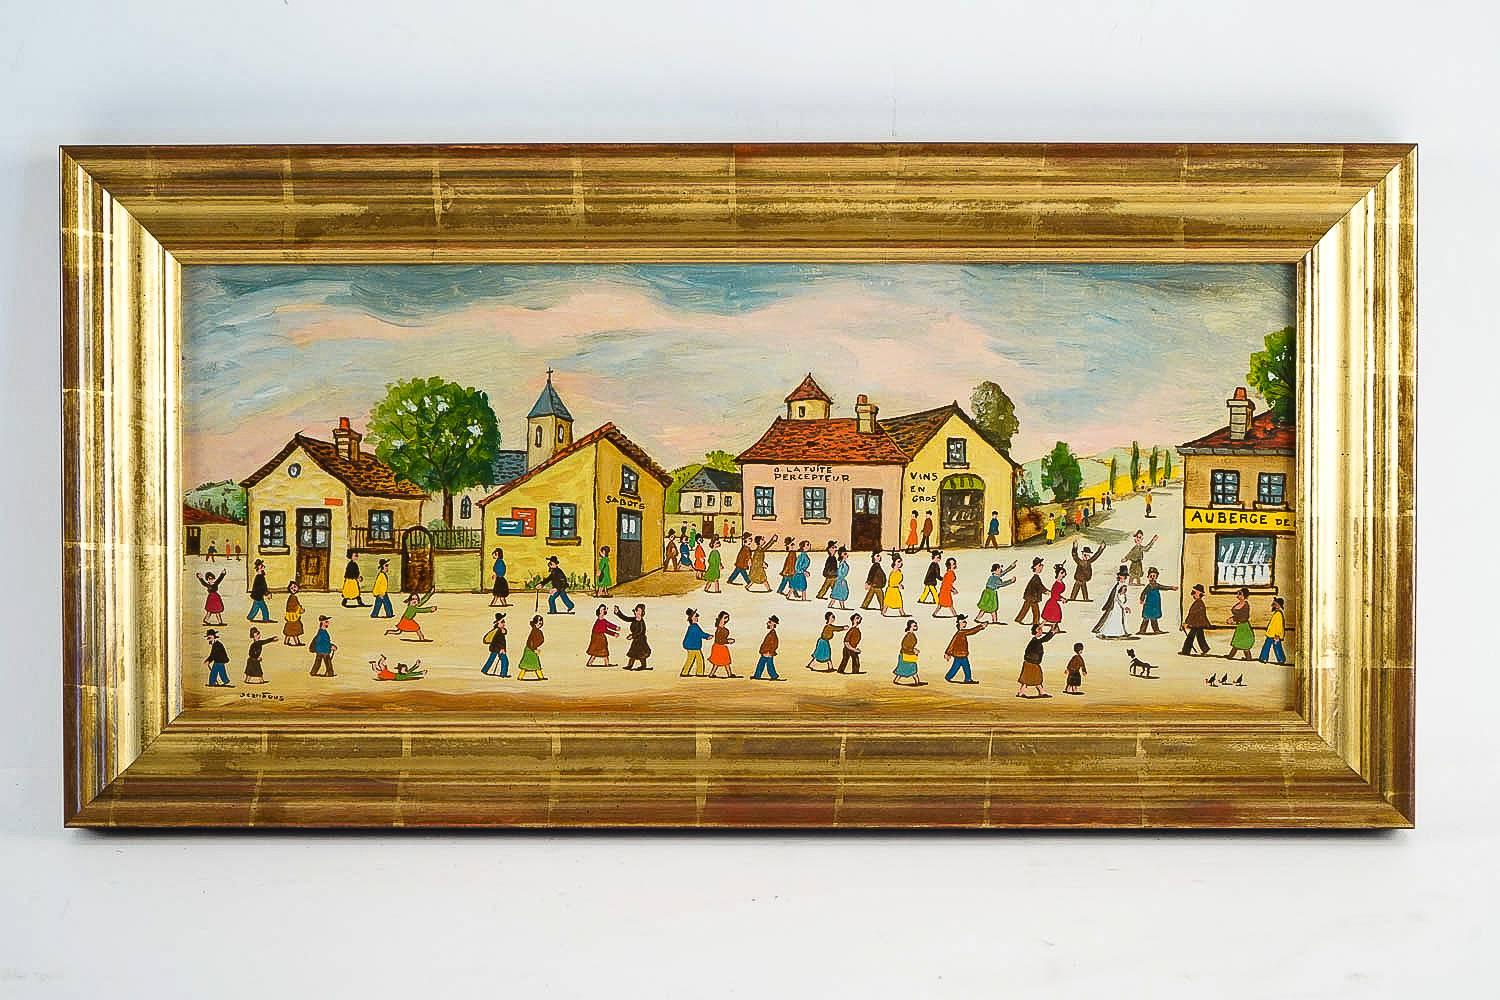 An exciting and decorative small oil on panel, The Wedding French naïve school, circa 1951.

Measurements unframed: H 9.44 in., W 22.04 in.
Measurements with frame: H 12.99 in., W 25.59 in.

Our painting is an excellent condition.

Jean Fous, born